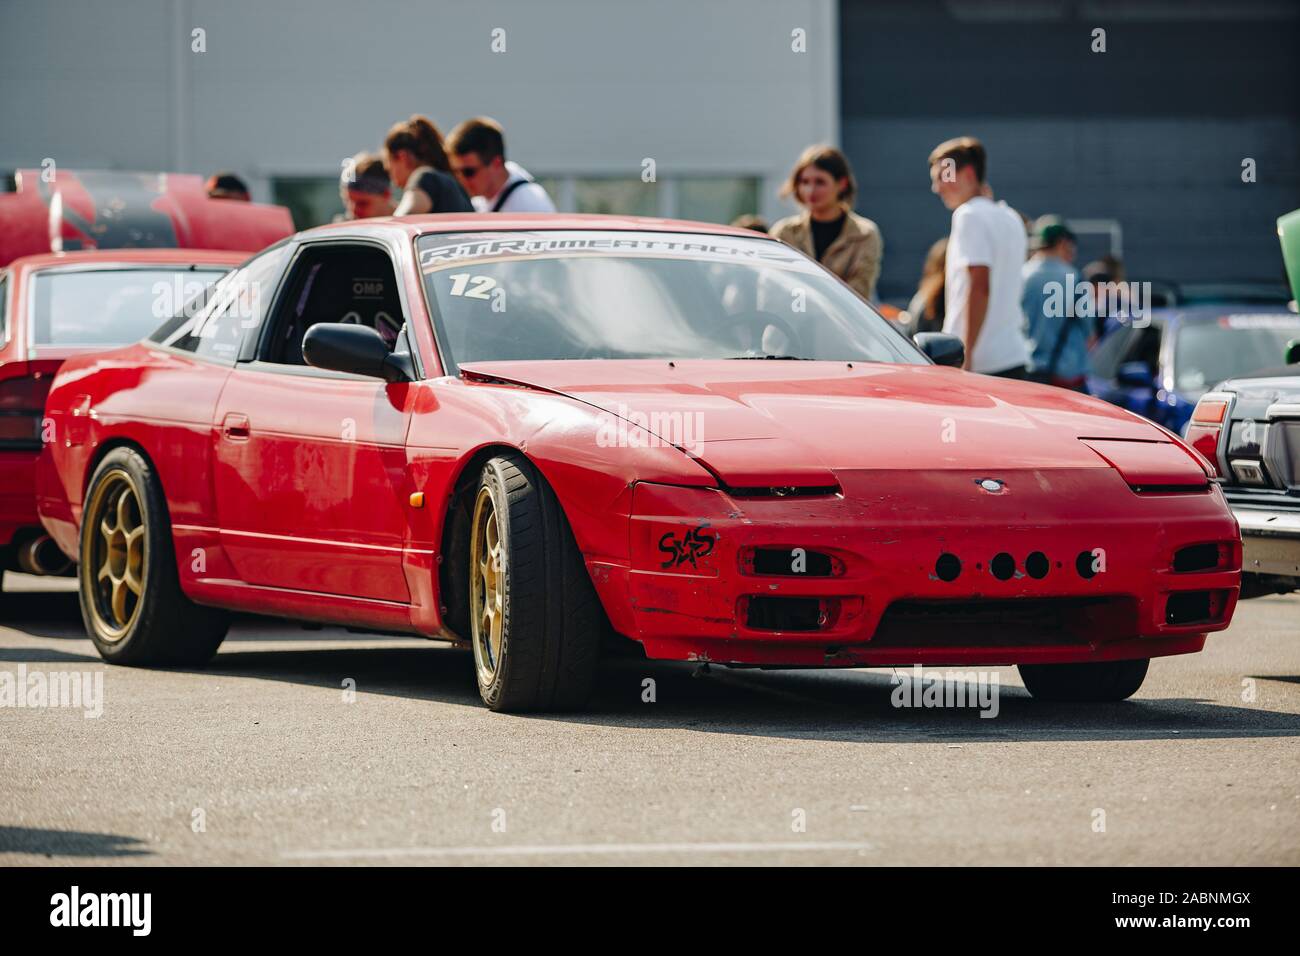 KYIV-28 JULY,2019: JDM car show outdoor.Tuned Japanese drift cars expo in  summer.Lowered Nissan 240SX car in red paint Stock Photo - Alamy